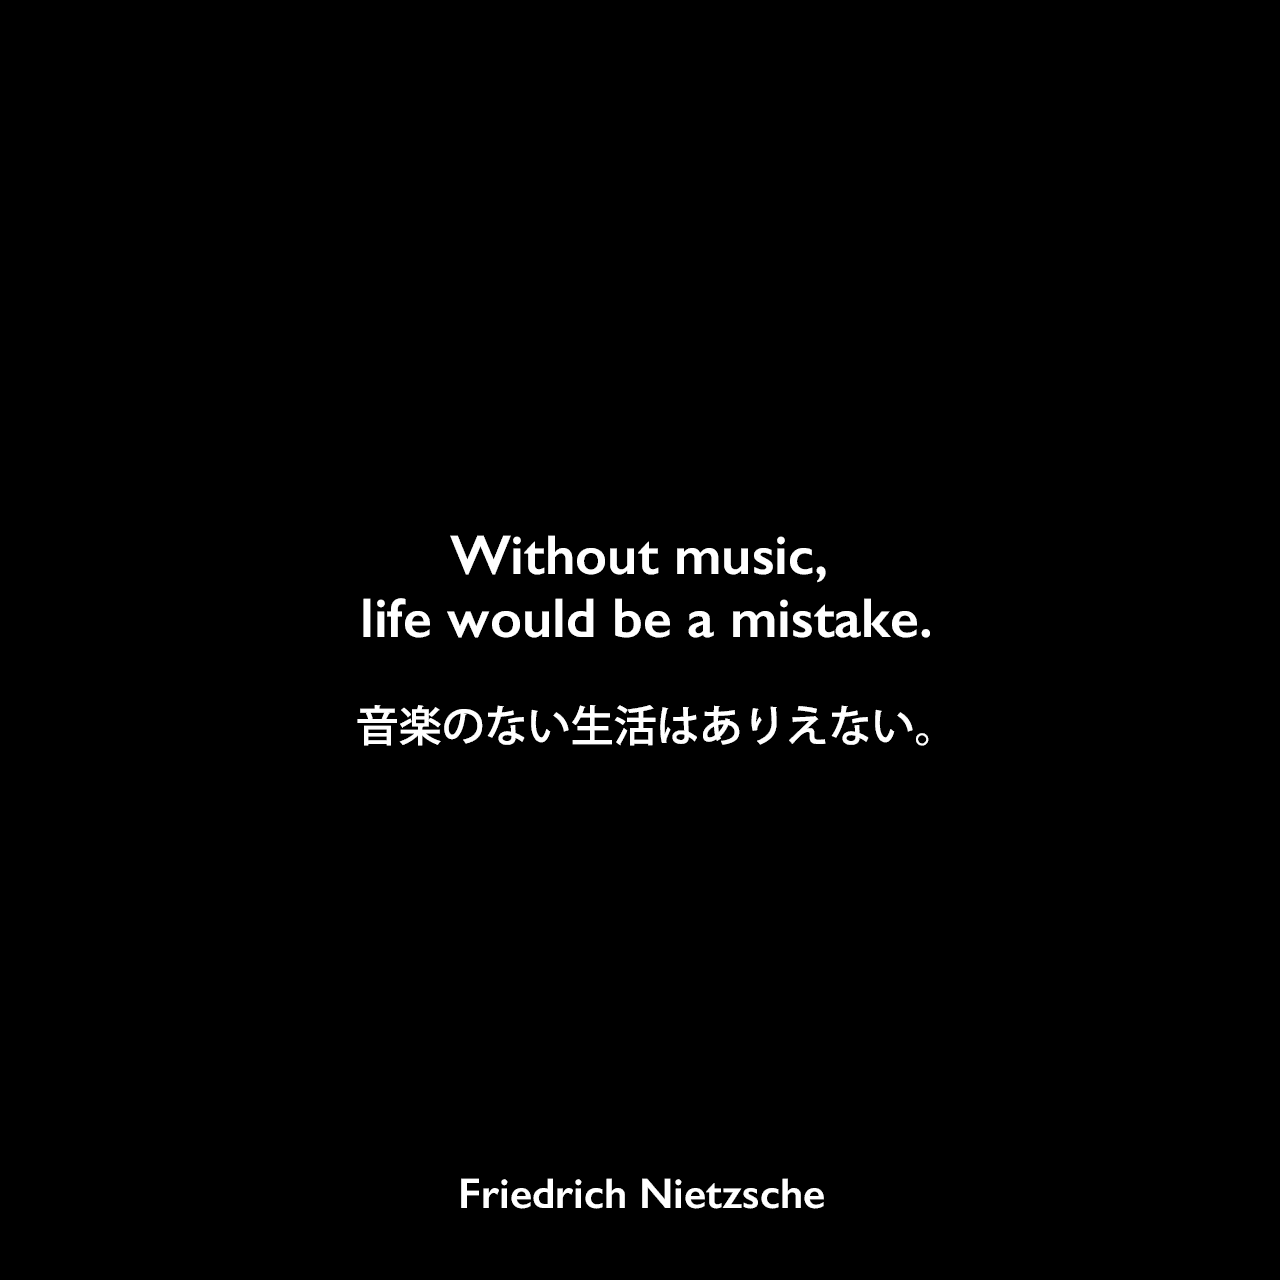 Without music, life would be a mistake.音楽のない生活はありえない。- ニーチェの本「Twilight of the Idols」よりFriedrich Nietzsche